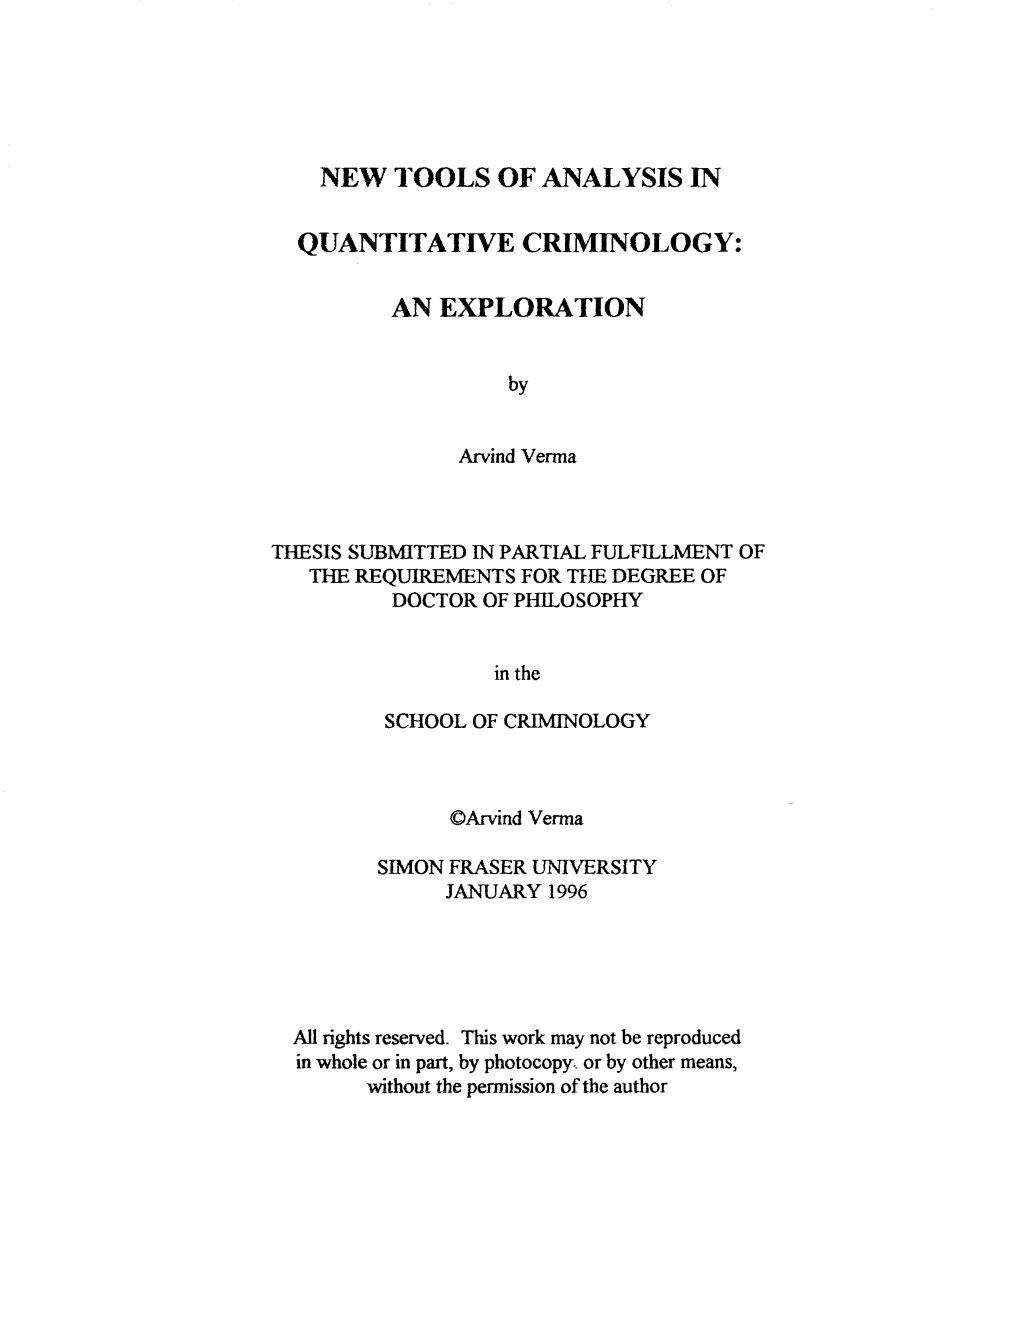 New Tools of Analysis in Quantitative Criminology: an Exploration